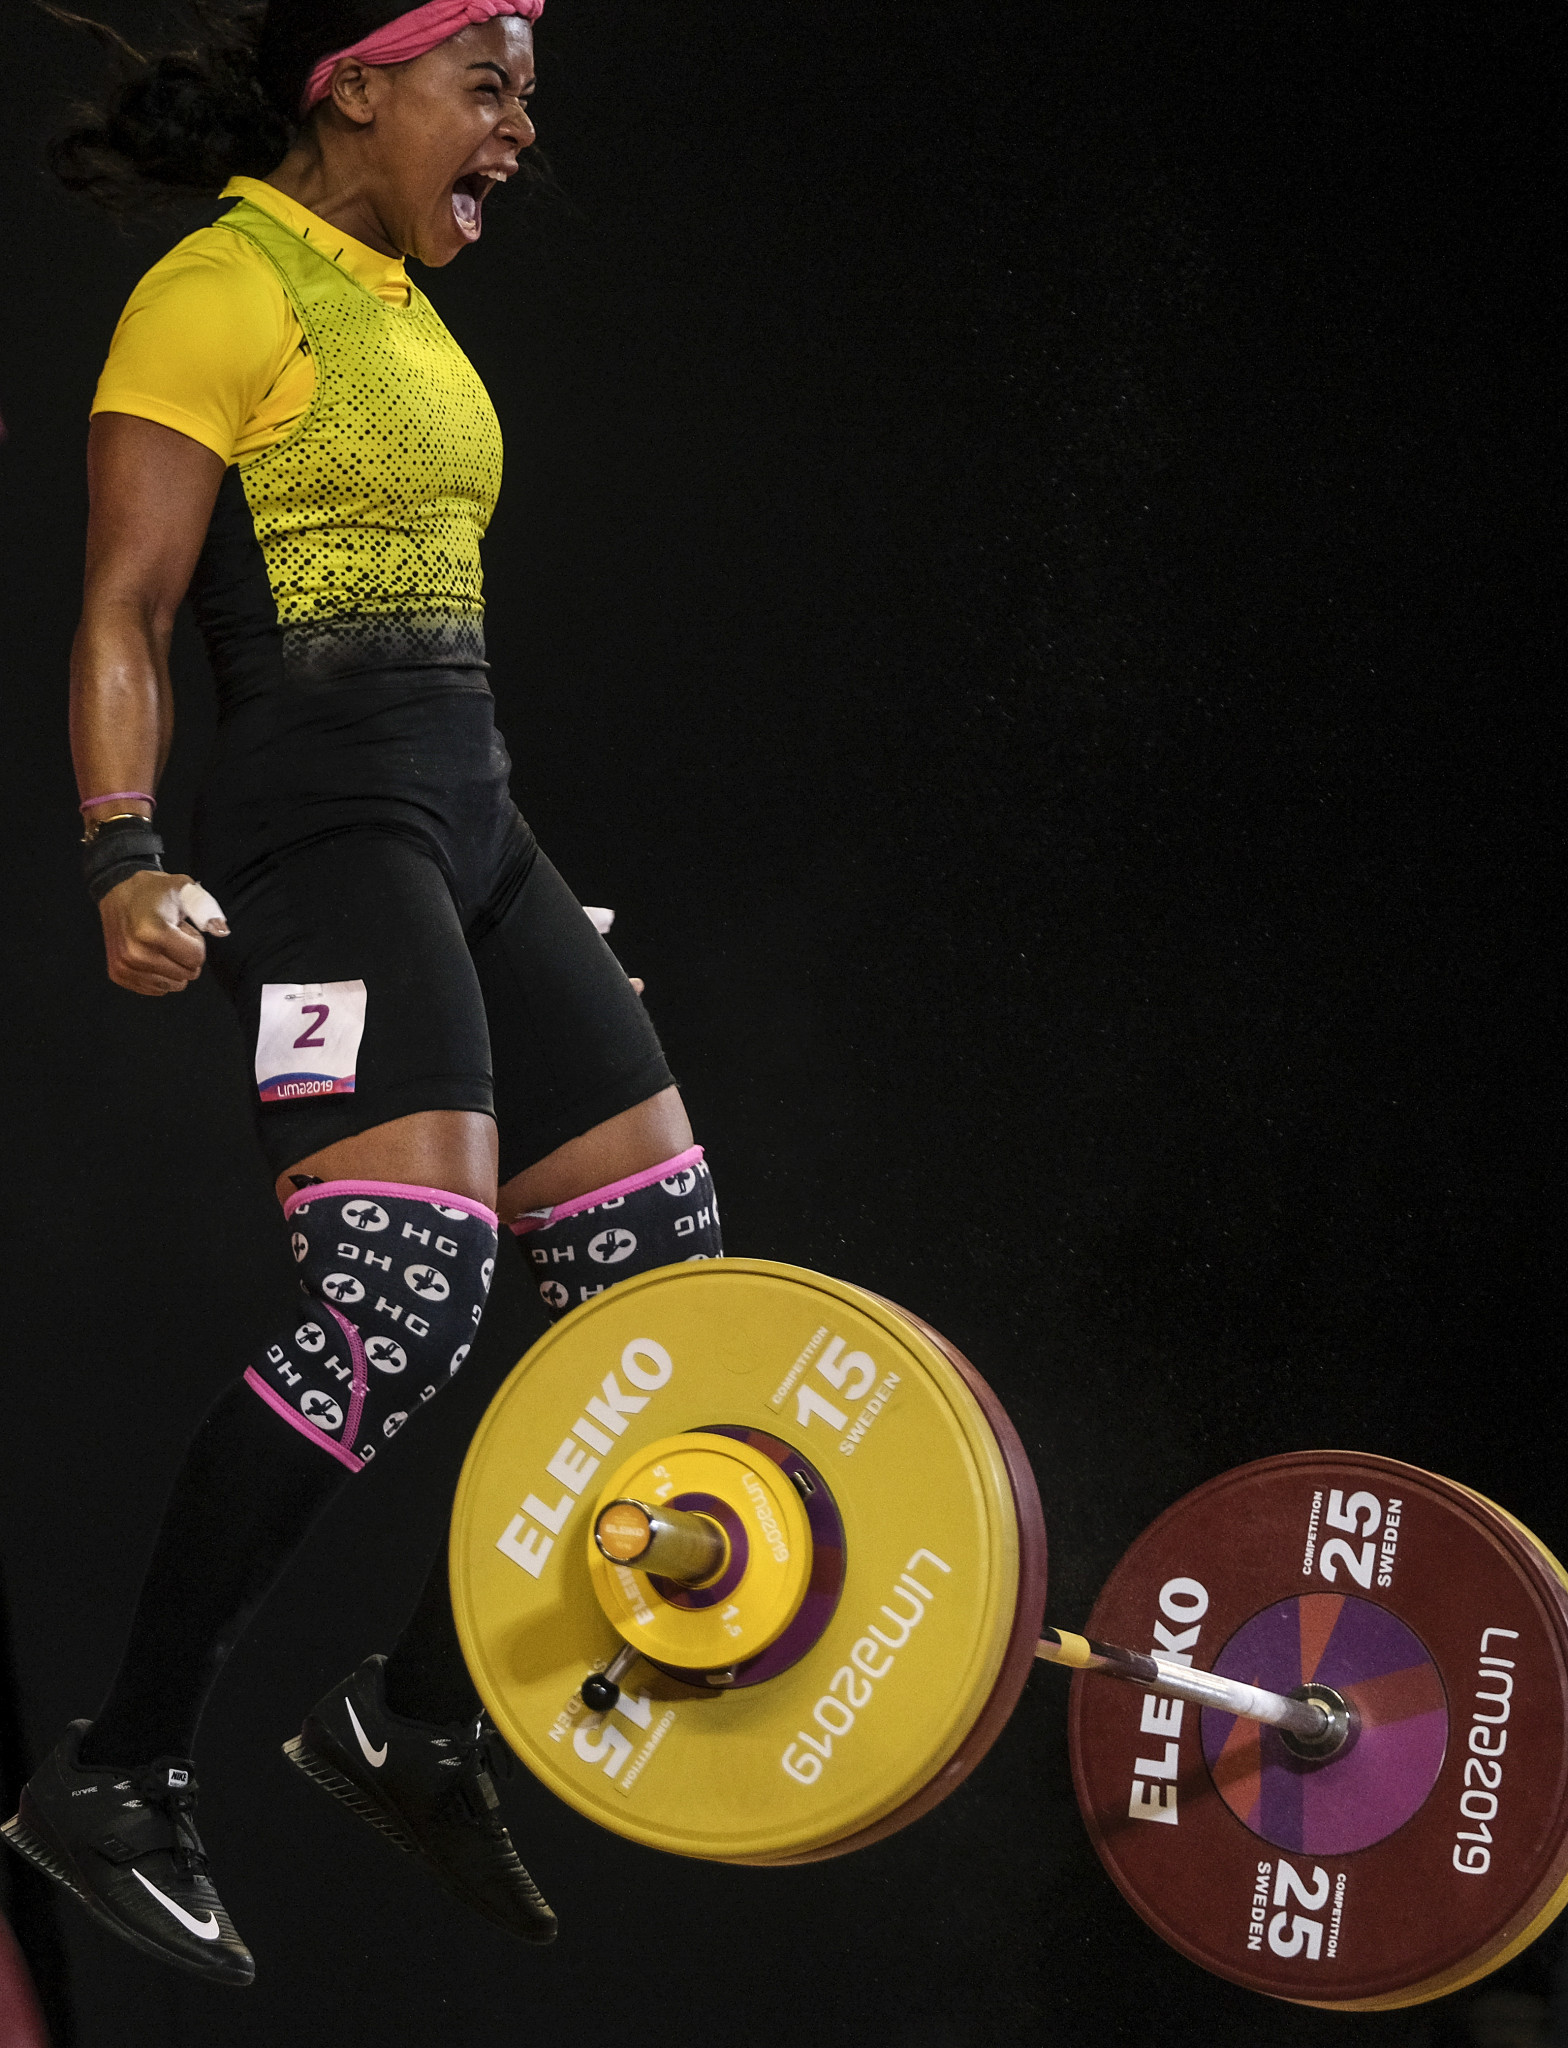 Weightlifting continued, with Ecuador managing a gold medal ©Lima 2019